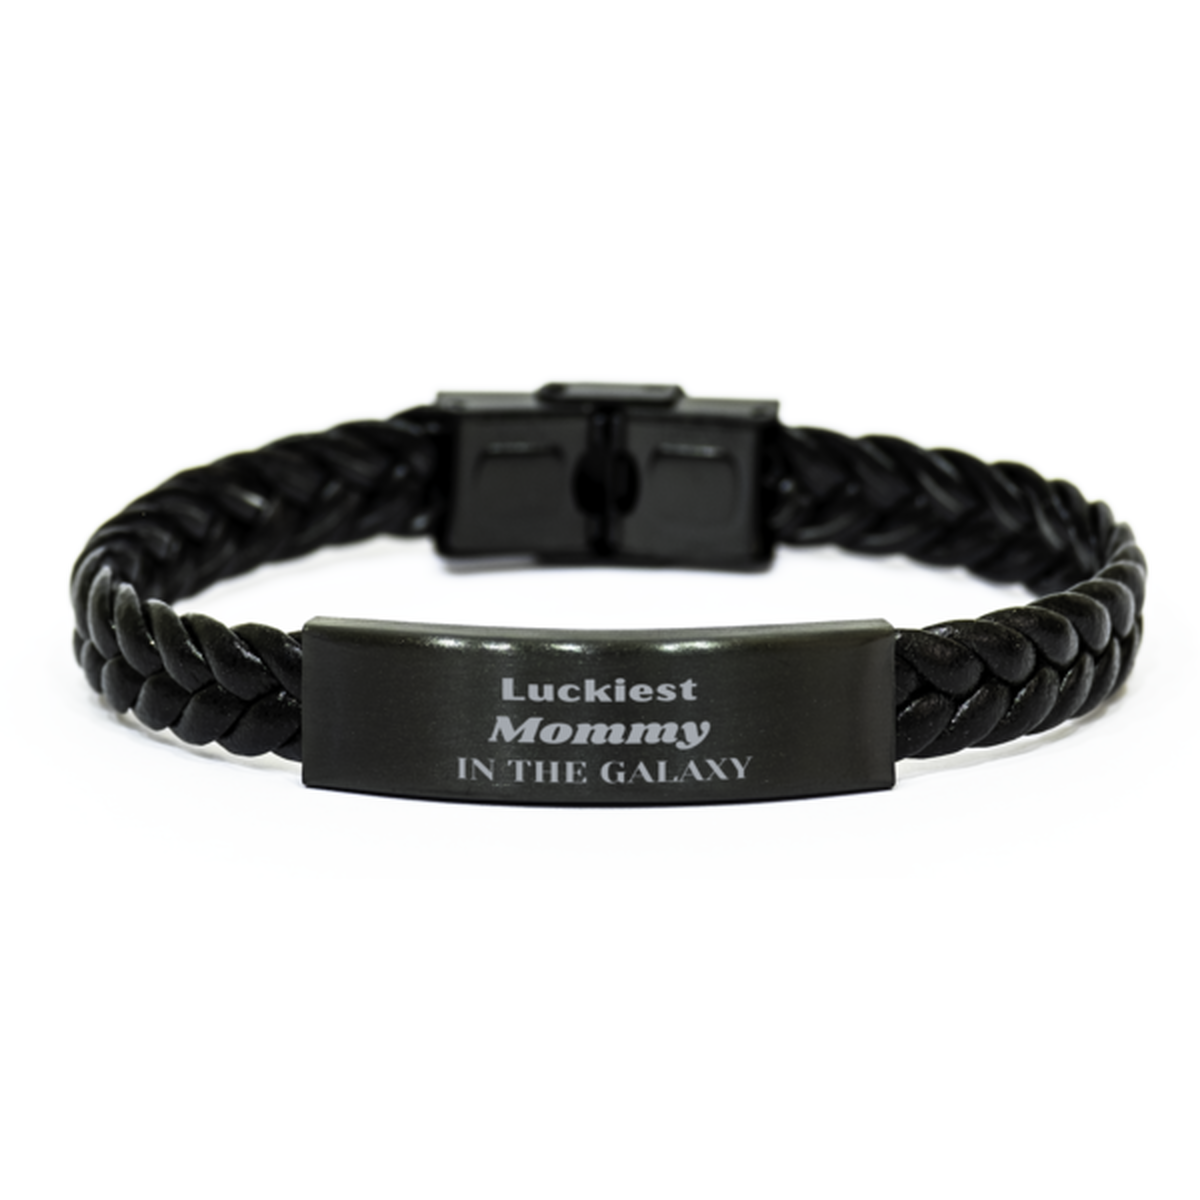 Luckiest Mommy in the Galaxy, To My Mommy Engraved Gifts, Christmas Mommy Braided Leather Bracelet Gifts, X-mas Birthday Unique Gifts For Mommy Men Women